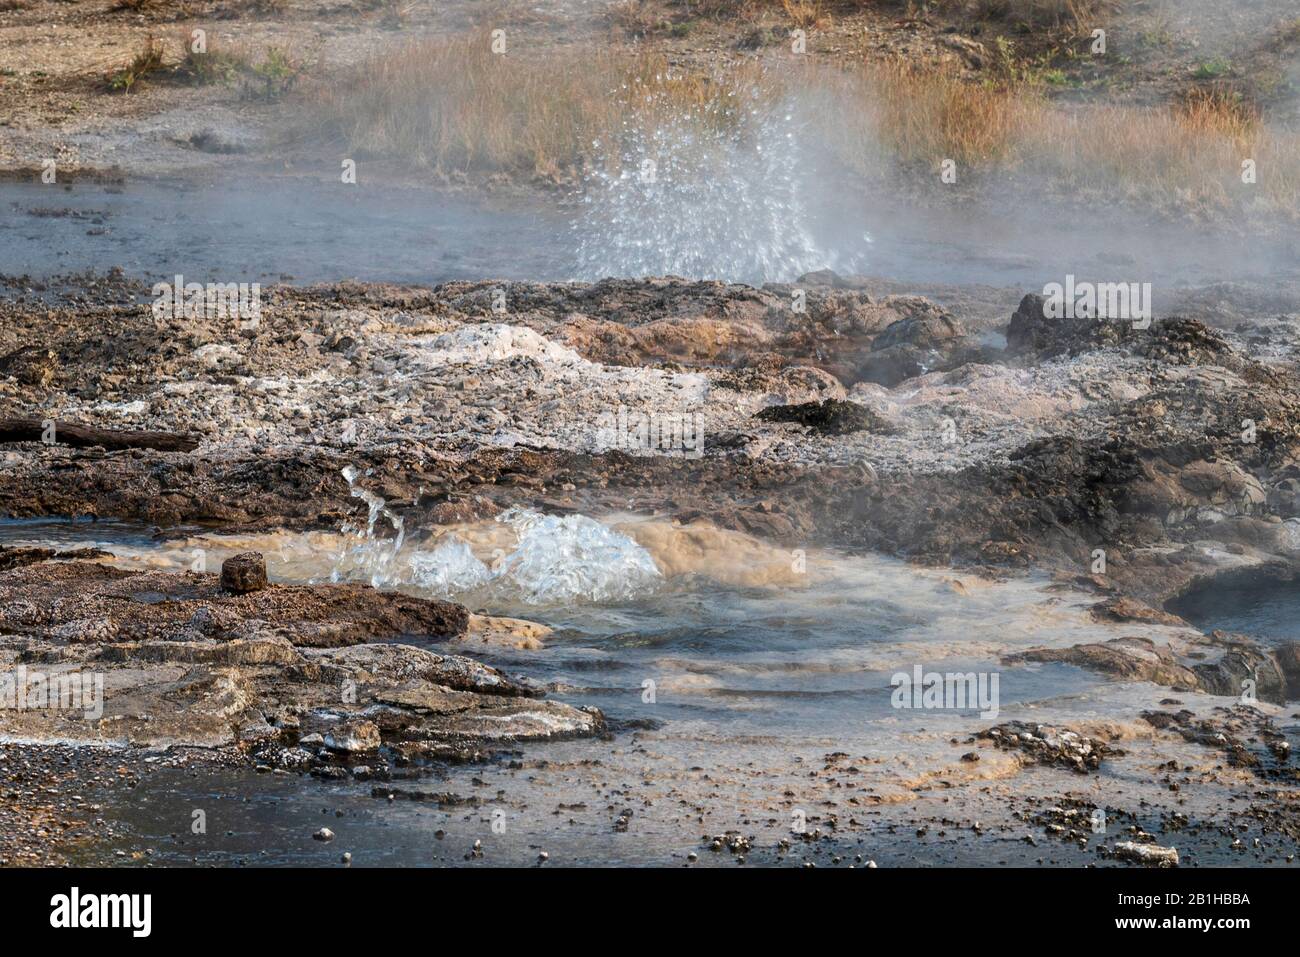 Very hot hot springs bubbling and steaming. Closeup of hot springs and surrounding ground. Stock Photo